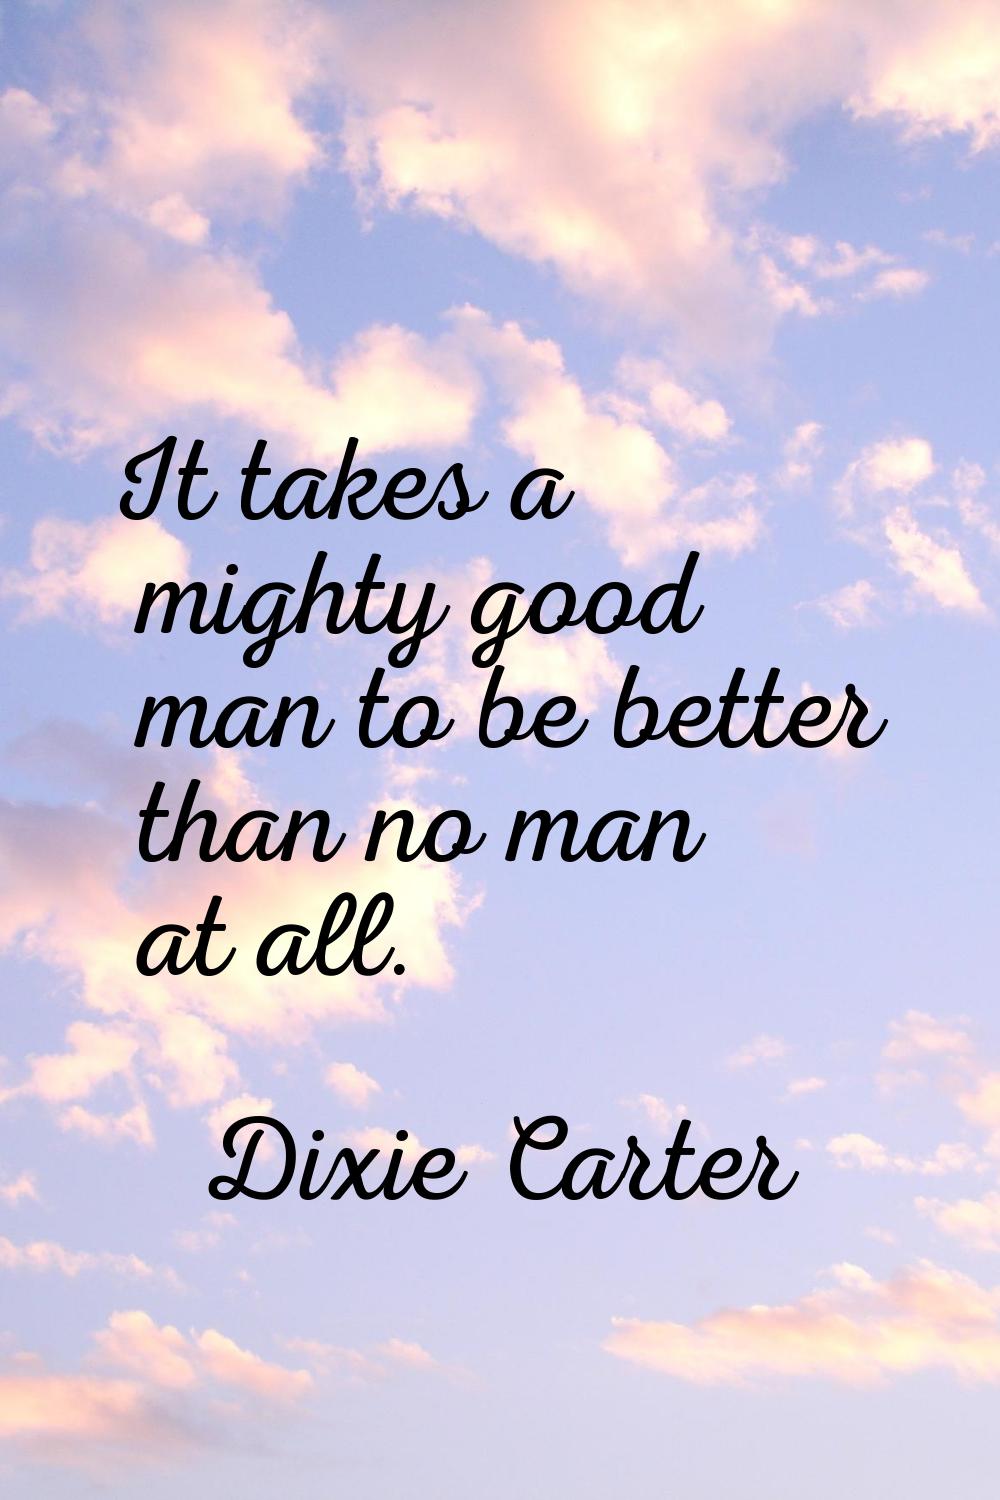 It takes a mighty good man to be better than no man at all.